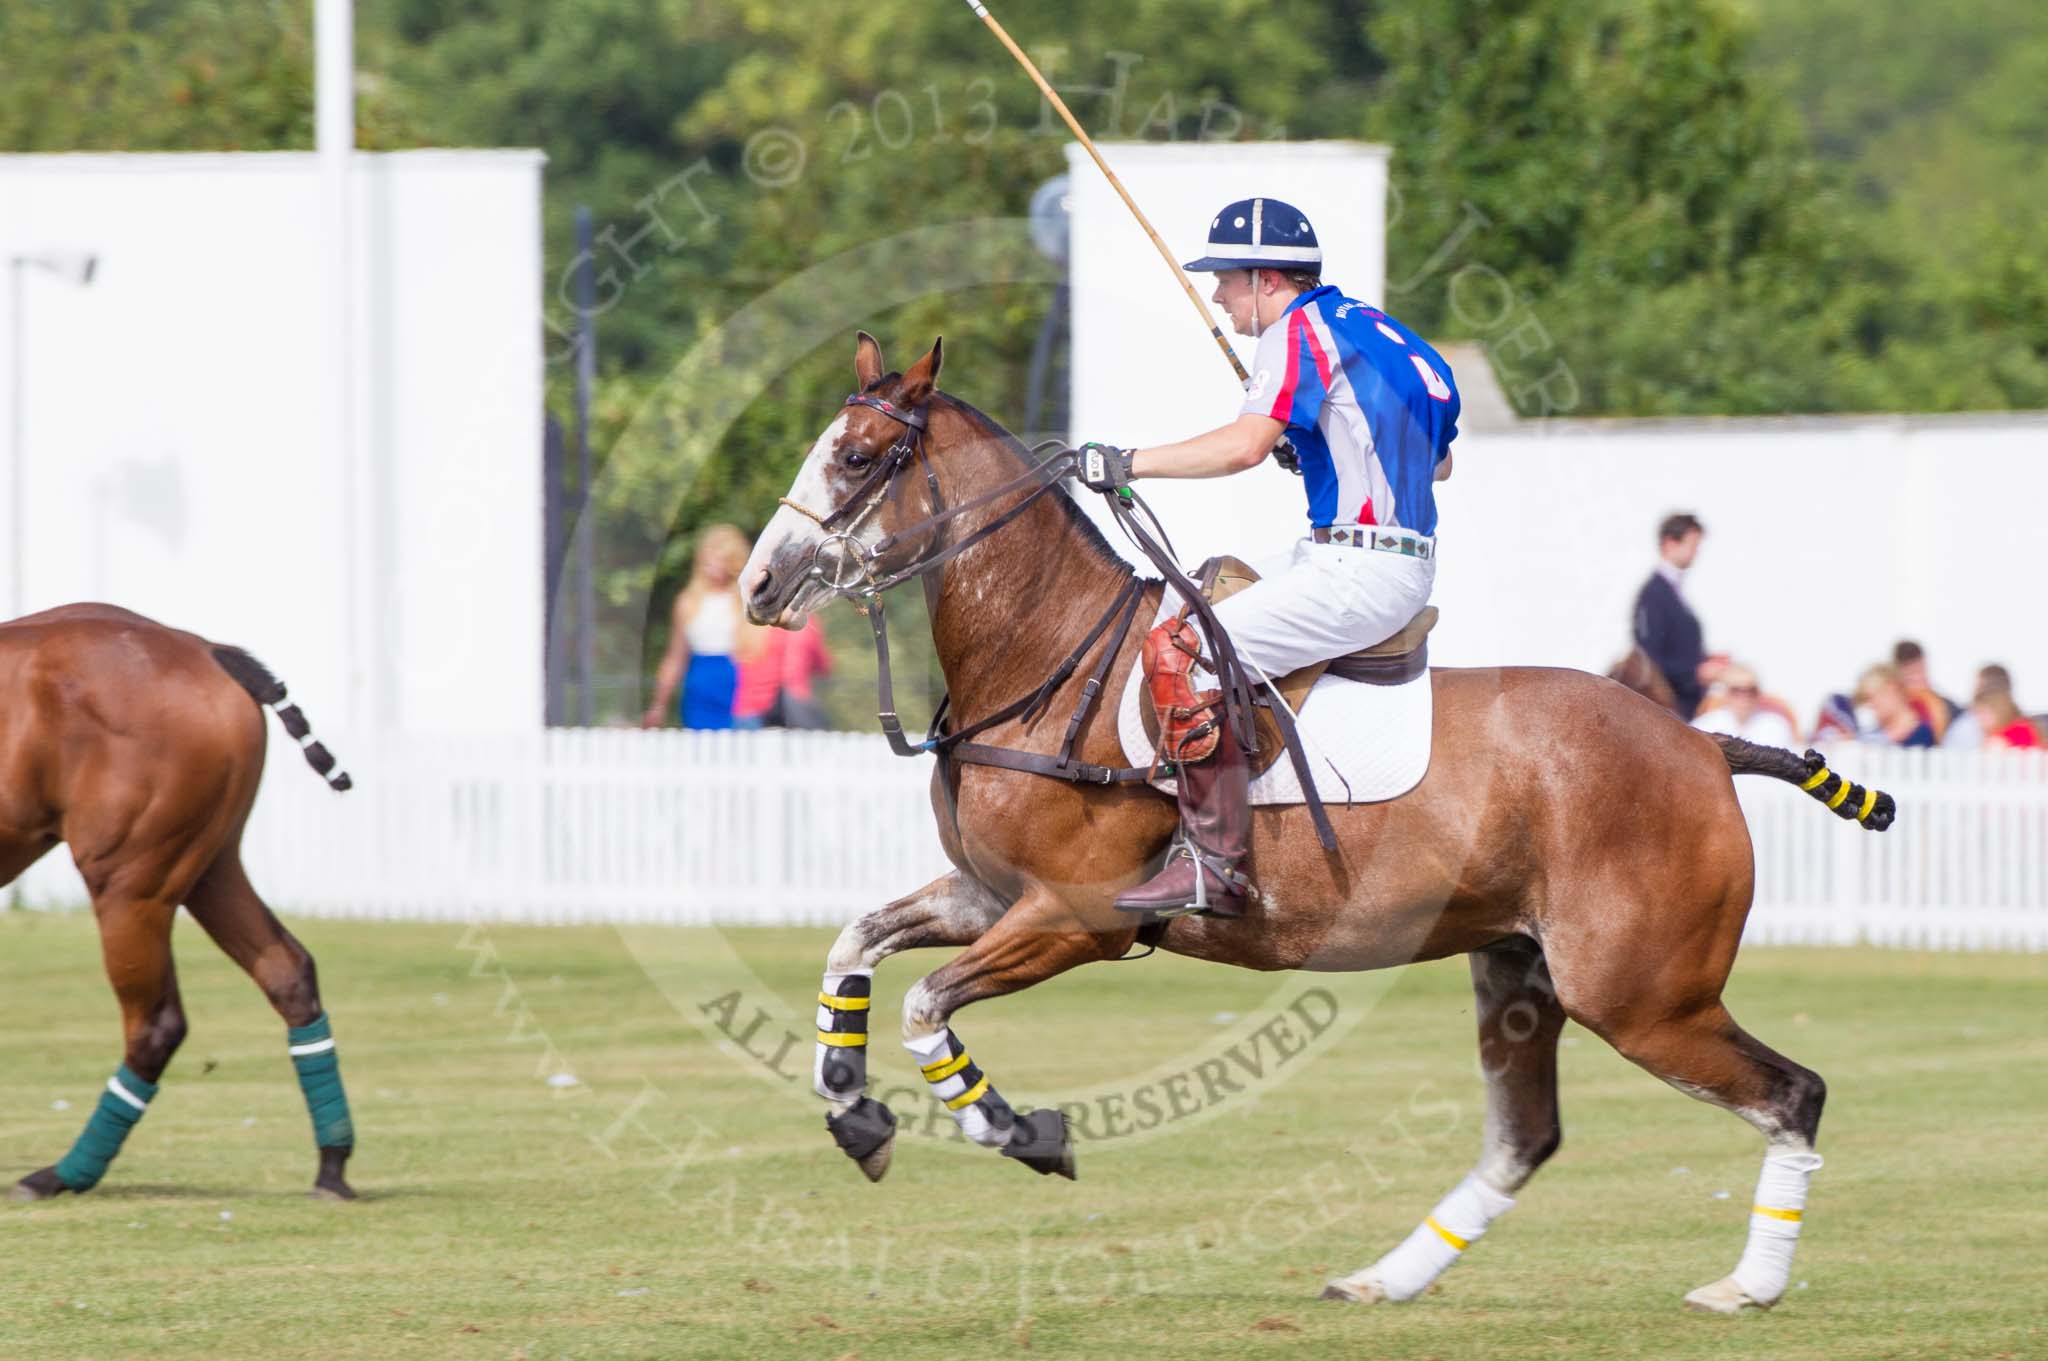 DBPC Polo in the Park 2013.
Dallas Burston Polo Club, ,
Southam,
Warwickshire,
United Kingdom,
on 01 September 2013 at 14:31, image #402